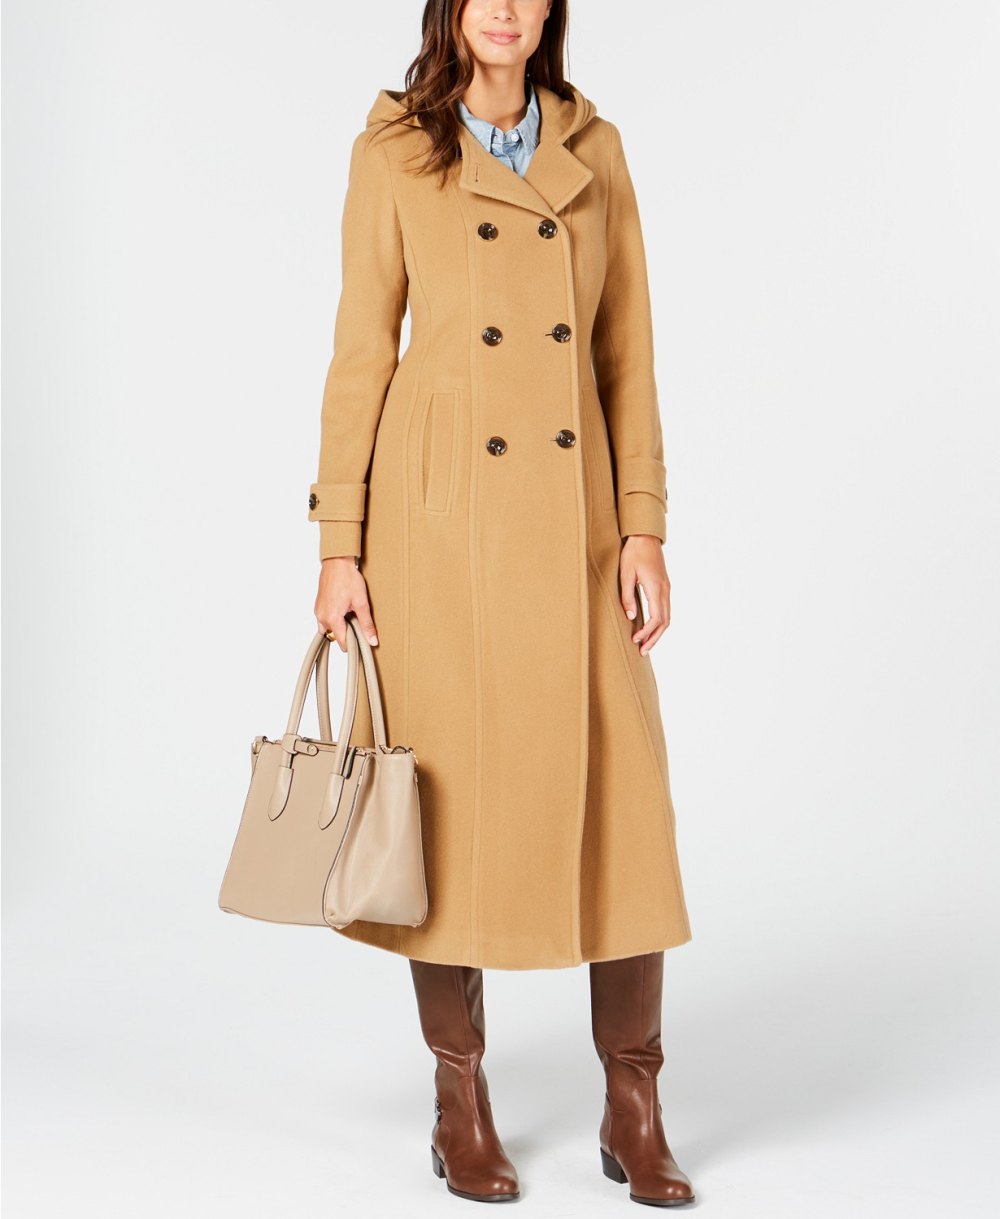 Anne Klein Double-Breasted Hooded Coat (Camel)